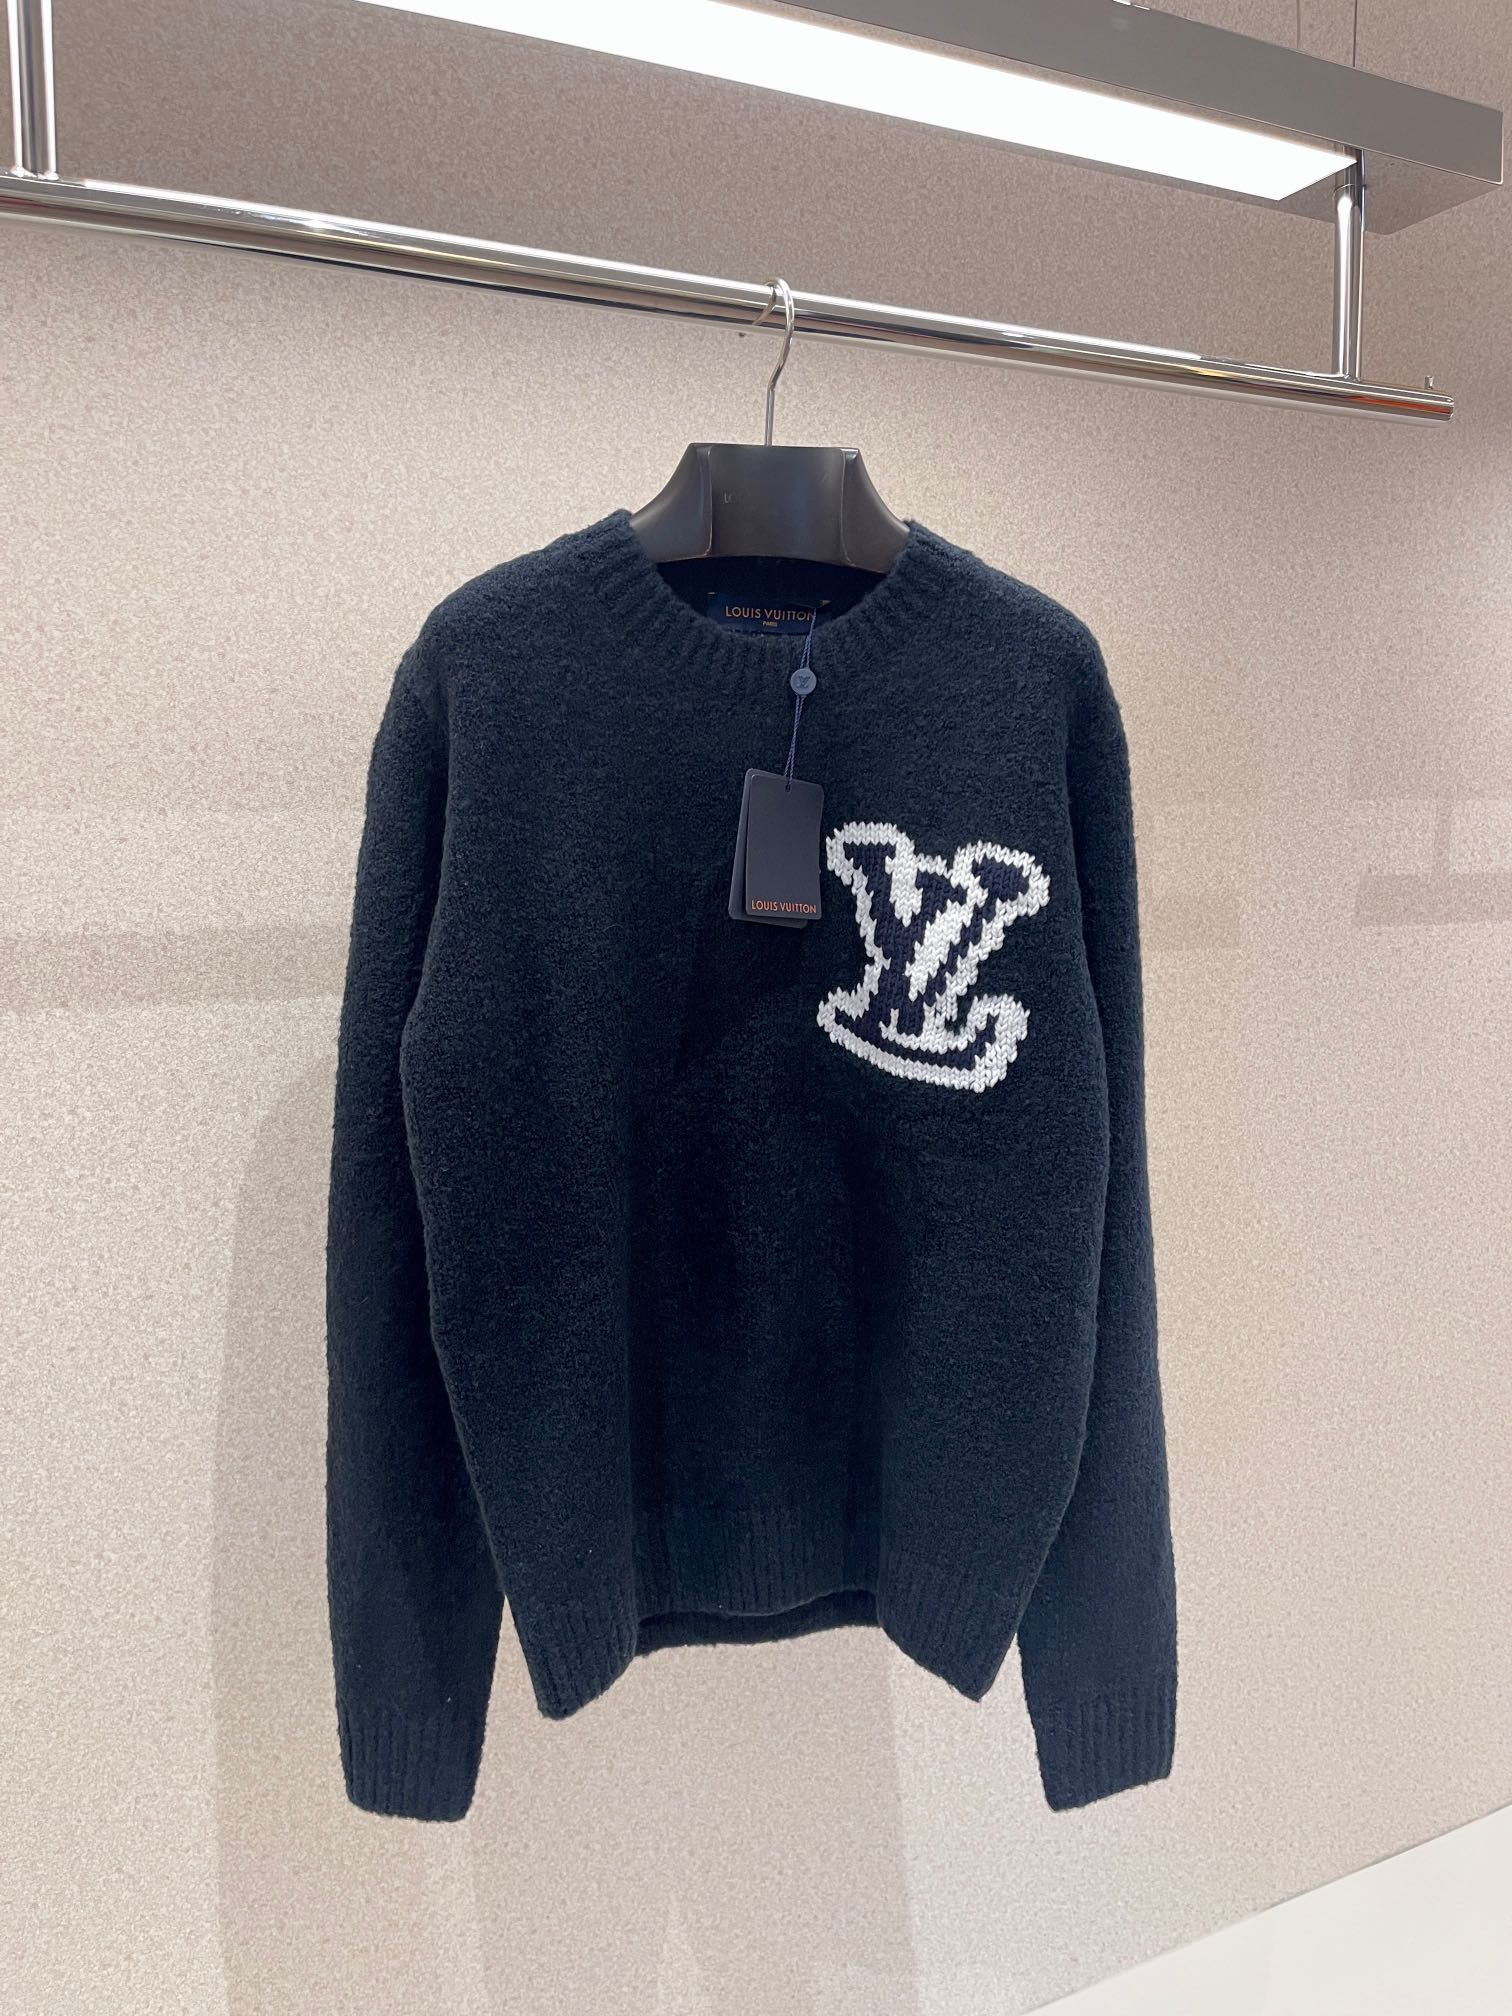 Authentic lv Navy Blue Sweater, Men's Fashion, Tops & Sets